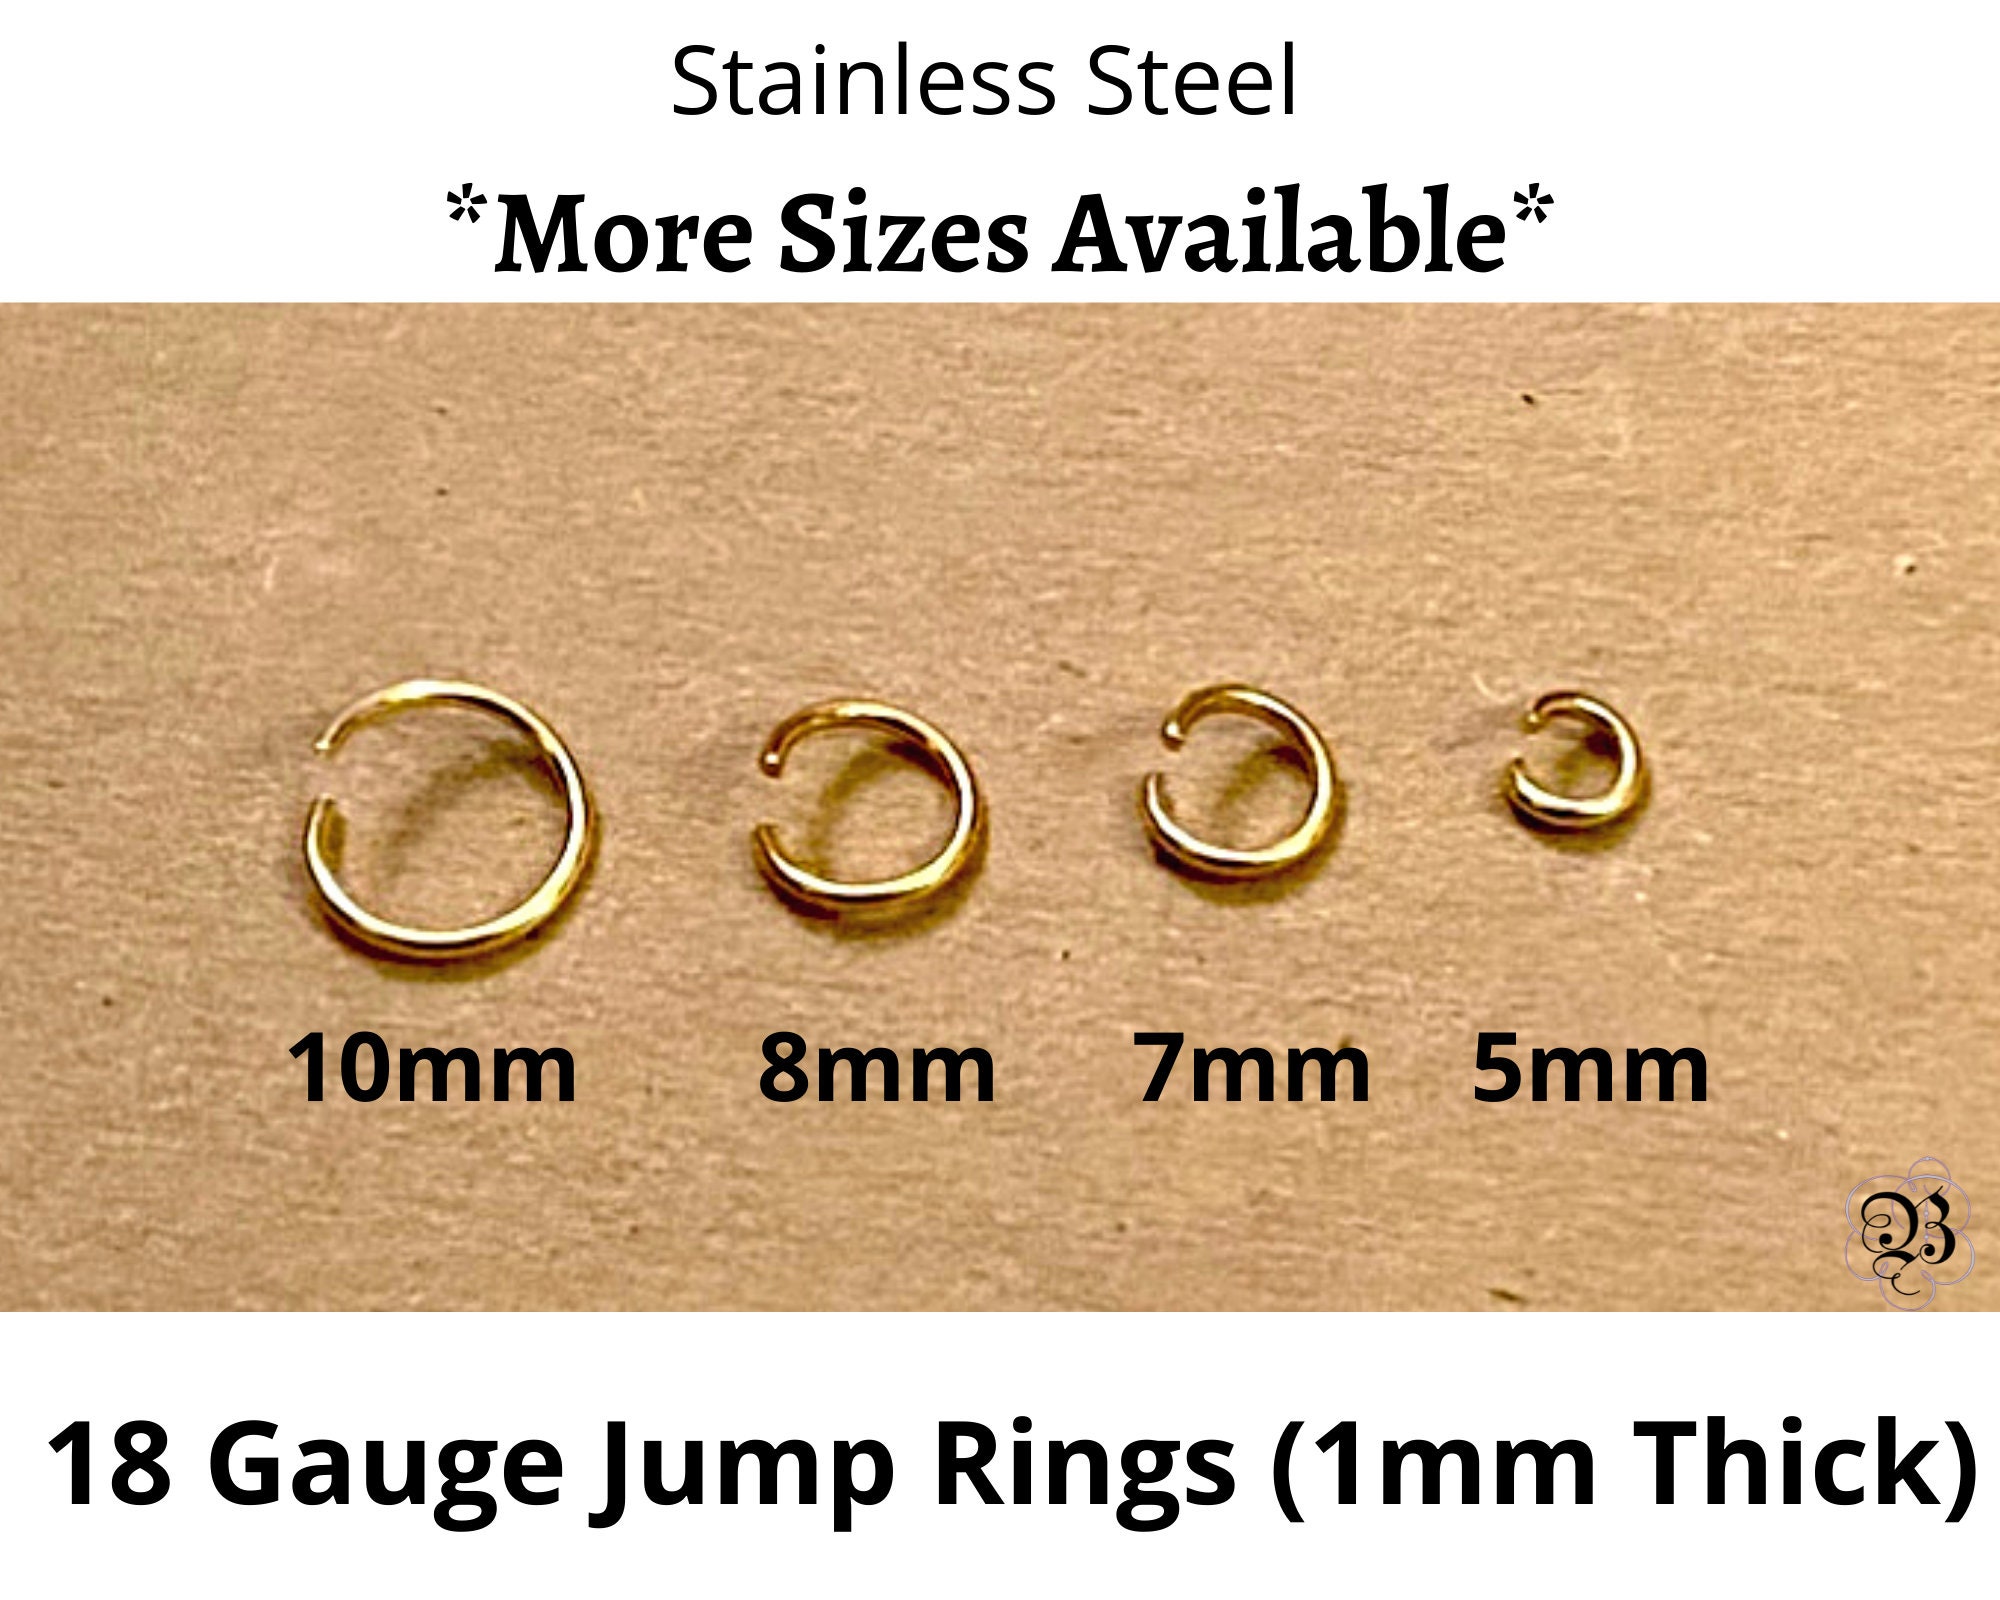 EOGOW 14k Gold Filled Twisted Open Jump Rings for Jewelry Making, 60Pcs  6mm/8mm/10mm Textured Gold Filled Jump Rings for Jewelry Making(Gold) Golden